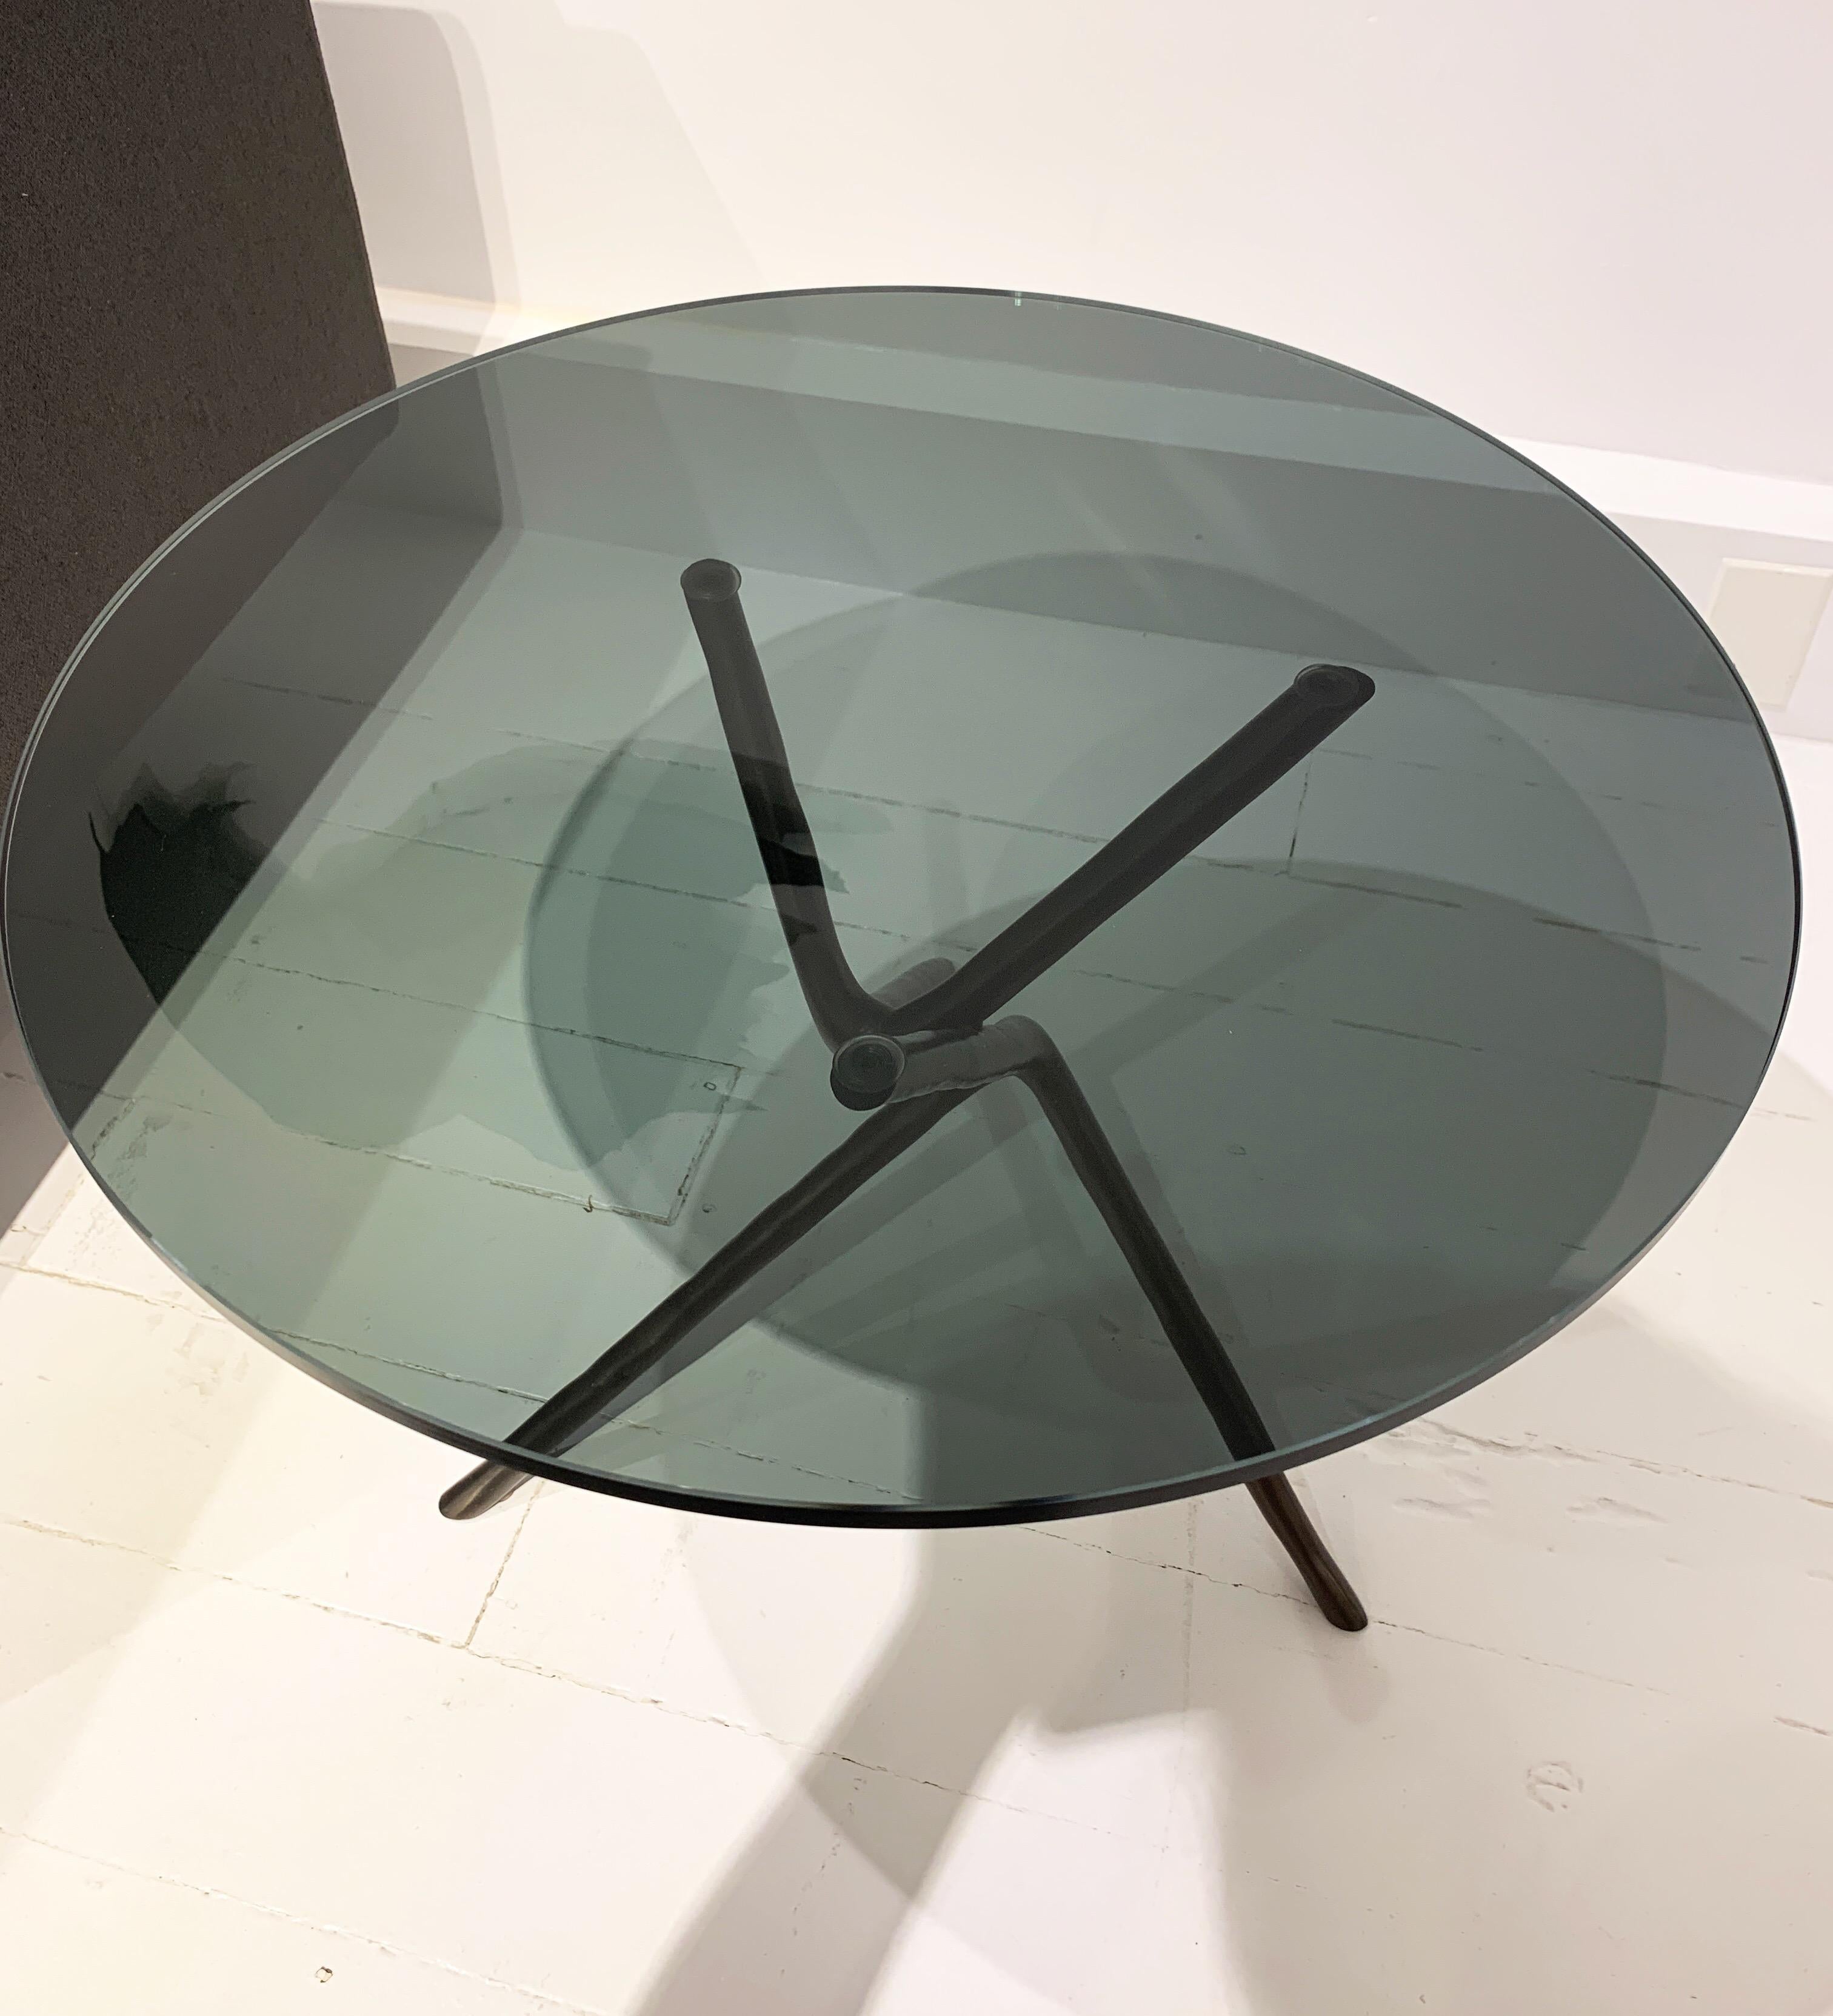 Side table designed by Matthias Hickl for Living Divani with cast bronze base and smoked glass top.